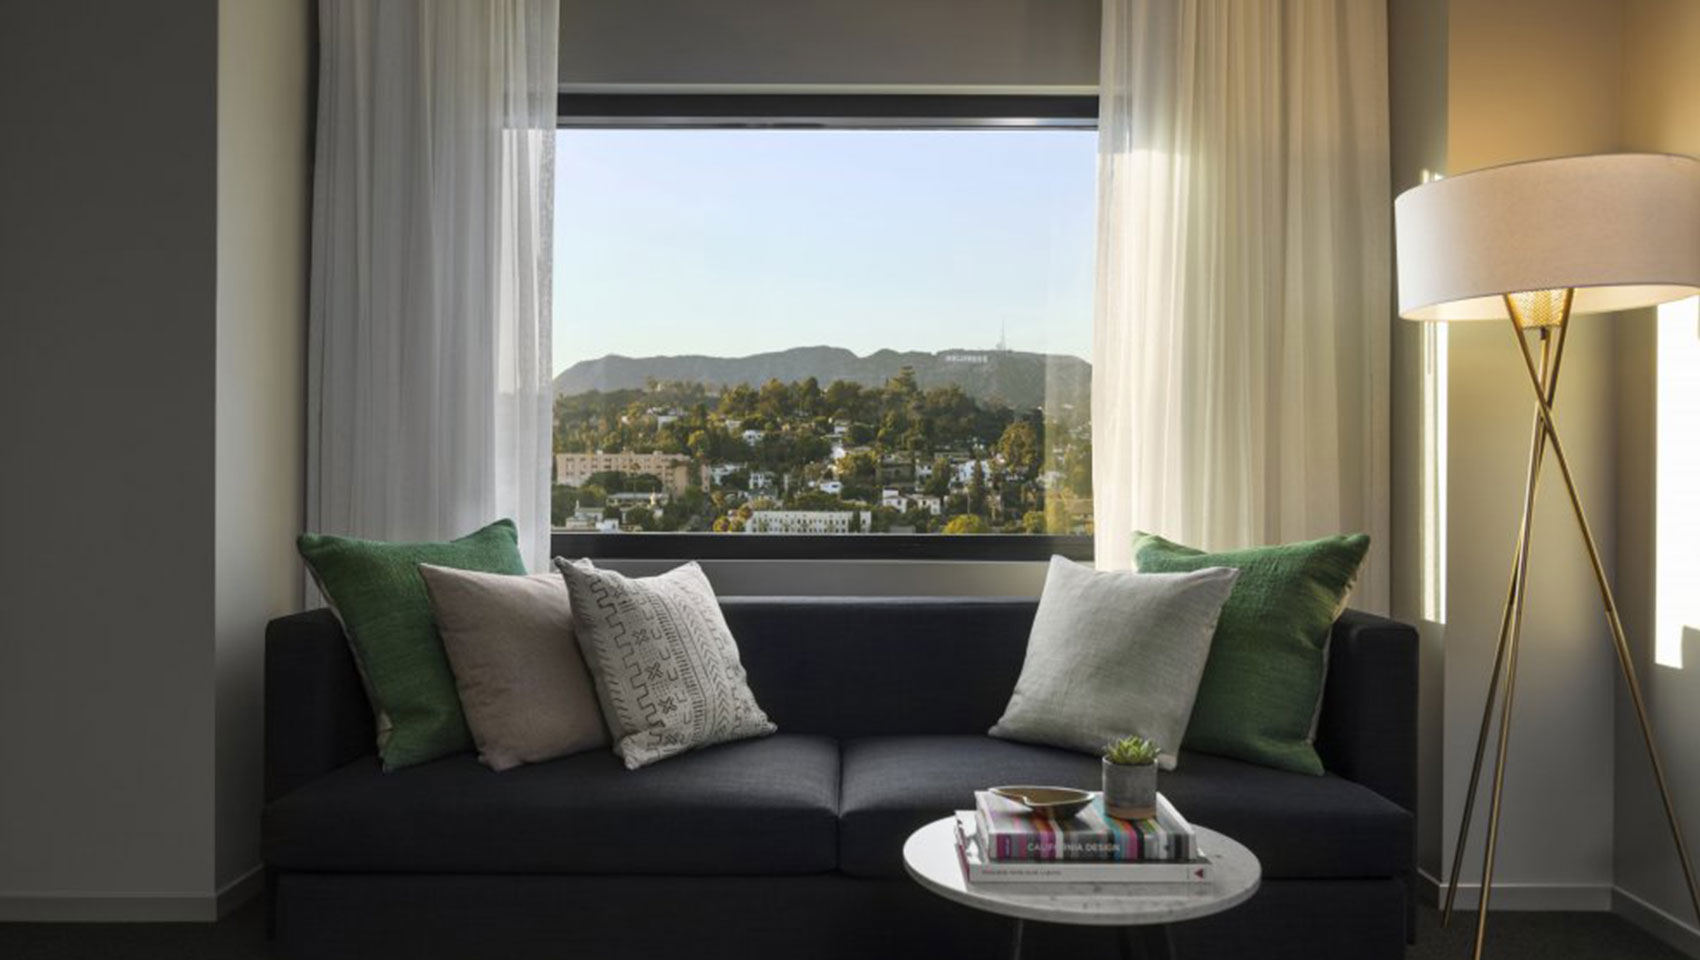 The Kimpton Everly Hotel hollywood hills king room